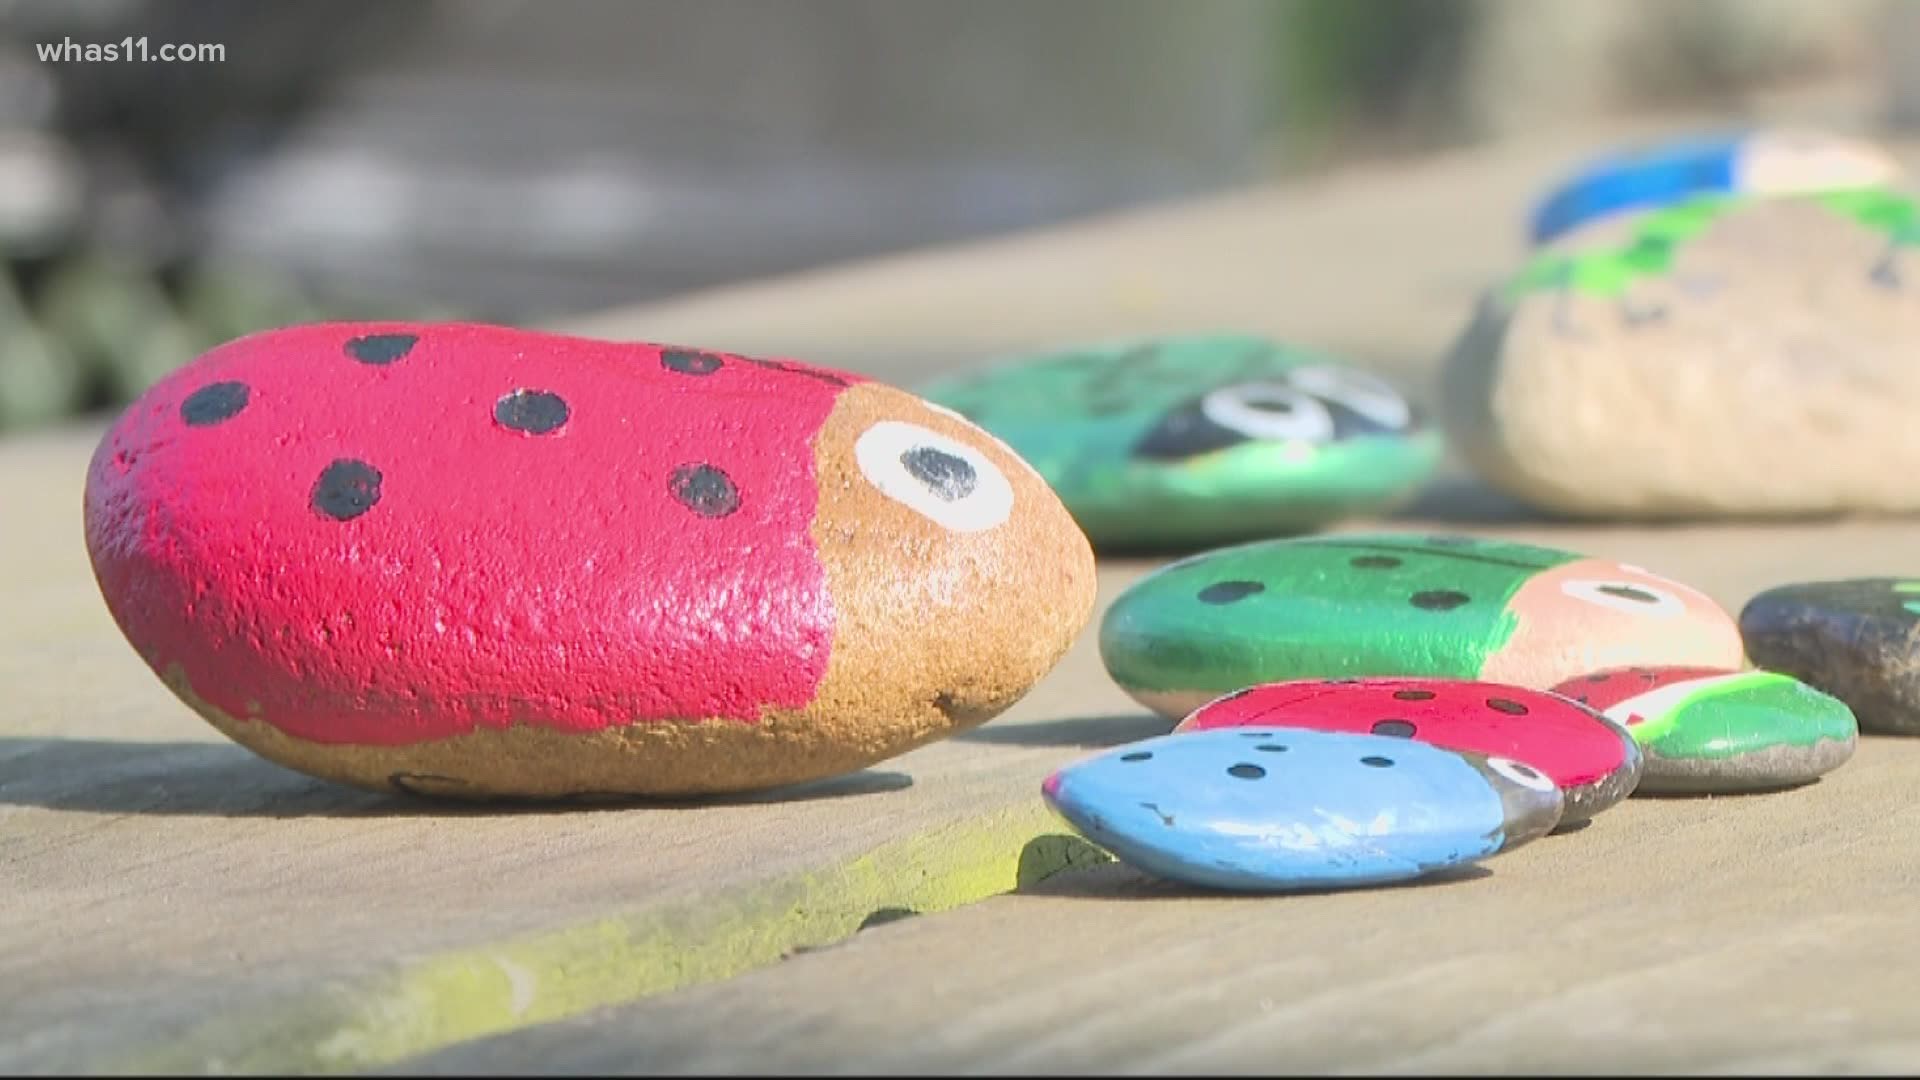 At the start of the COVID-19 pandemic, someone in the Port Fulton community began surprising people with rocks painted as ladybugs at their door steps.